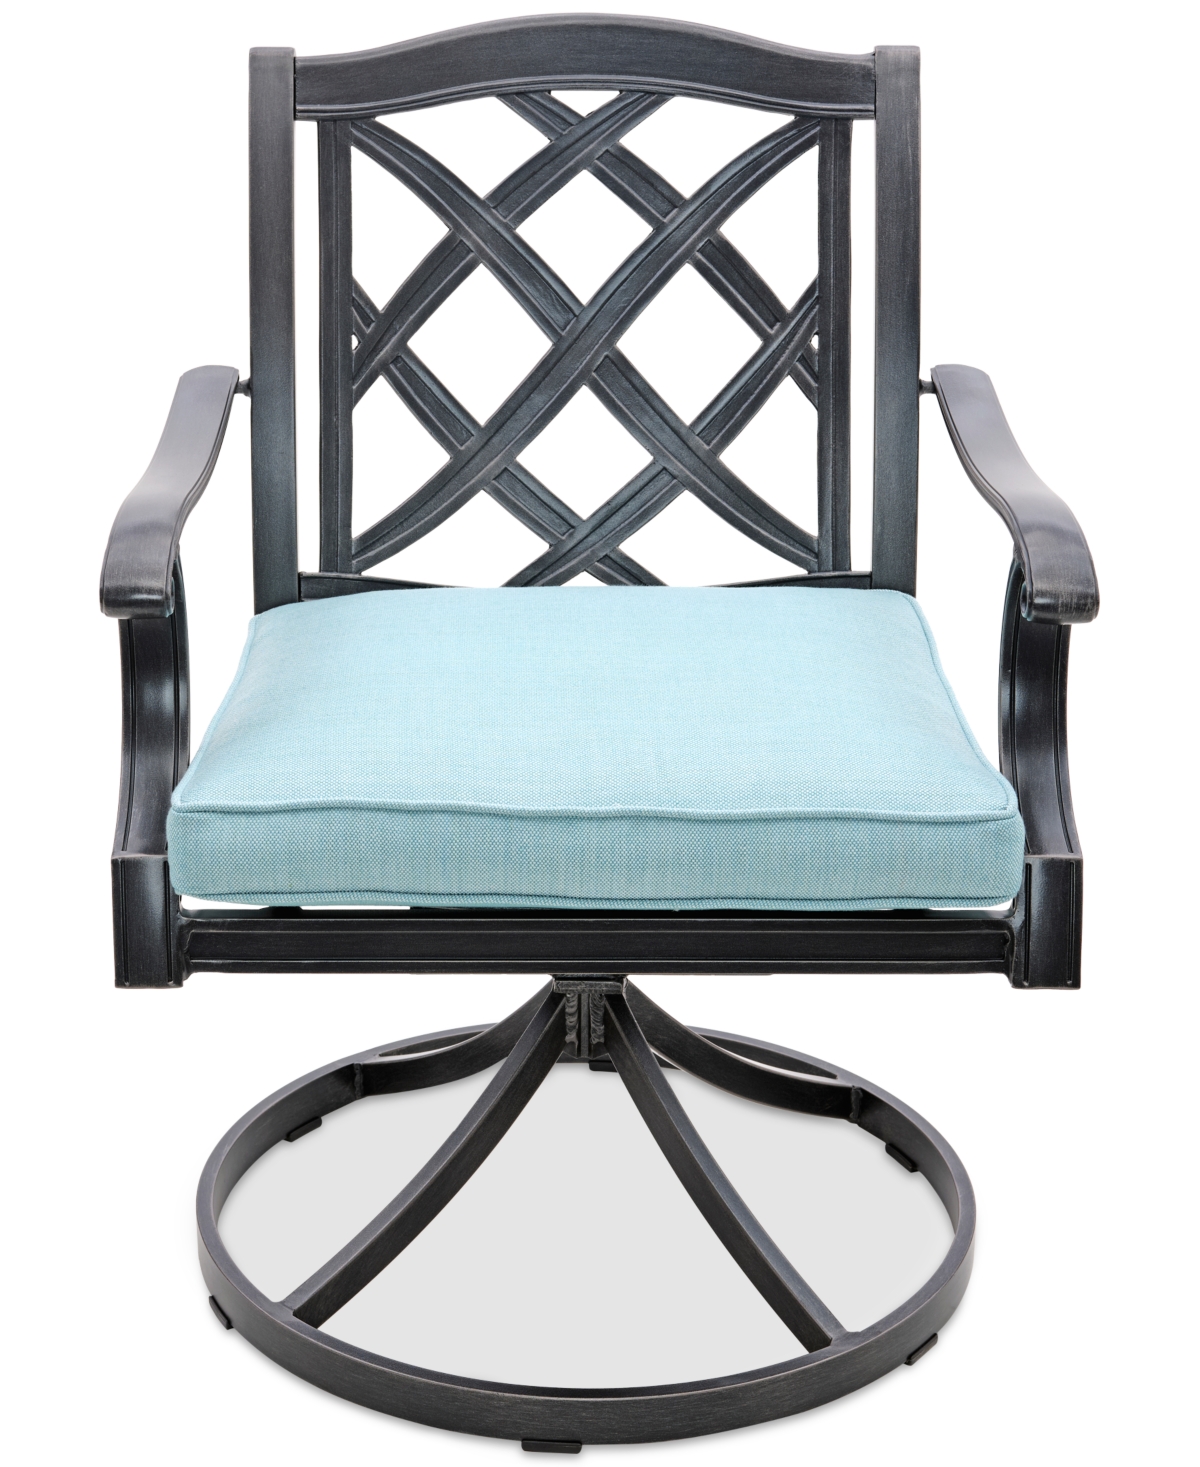 Agio Wythburn Mix And Match Lattice Outdoor Swivel Chair In Spa Light Blue,bronze Finish